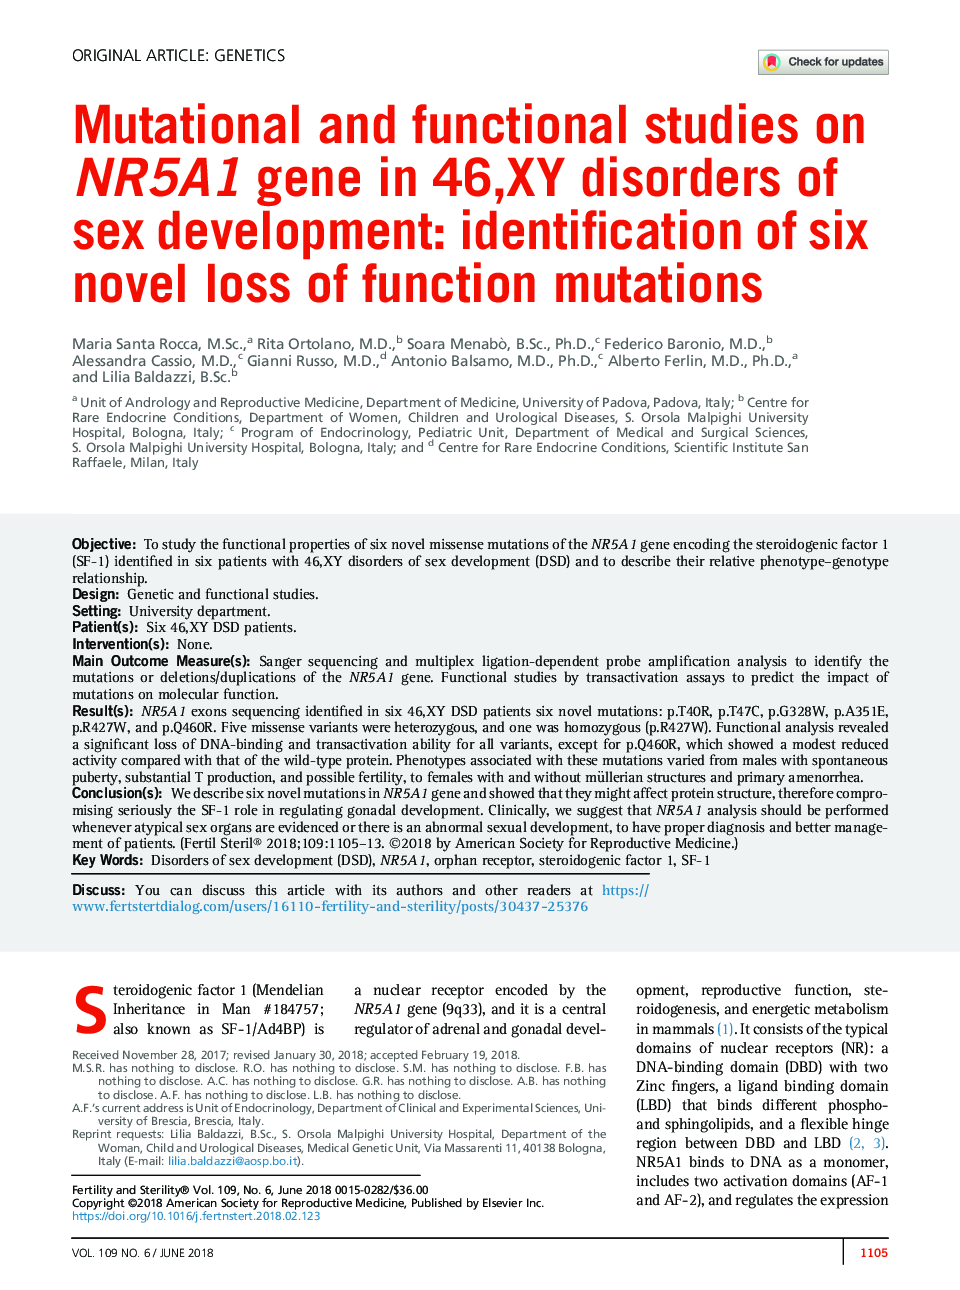 Mutational and functional studies on NR5A1 gene in 46,XY disorders of sex development: identification of six novel loss of function mutations